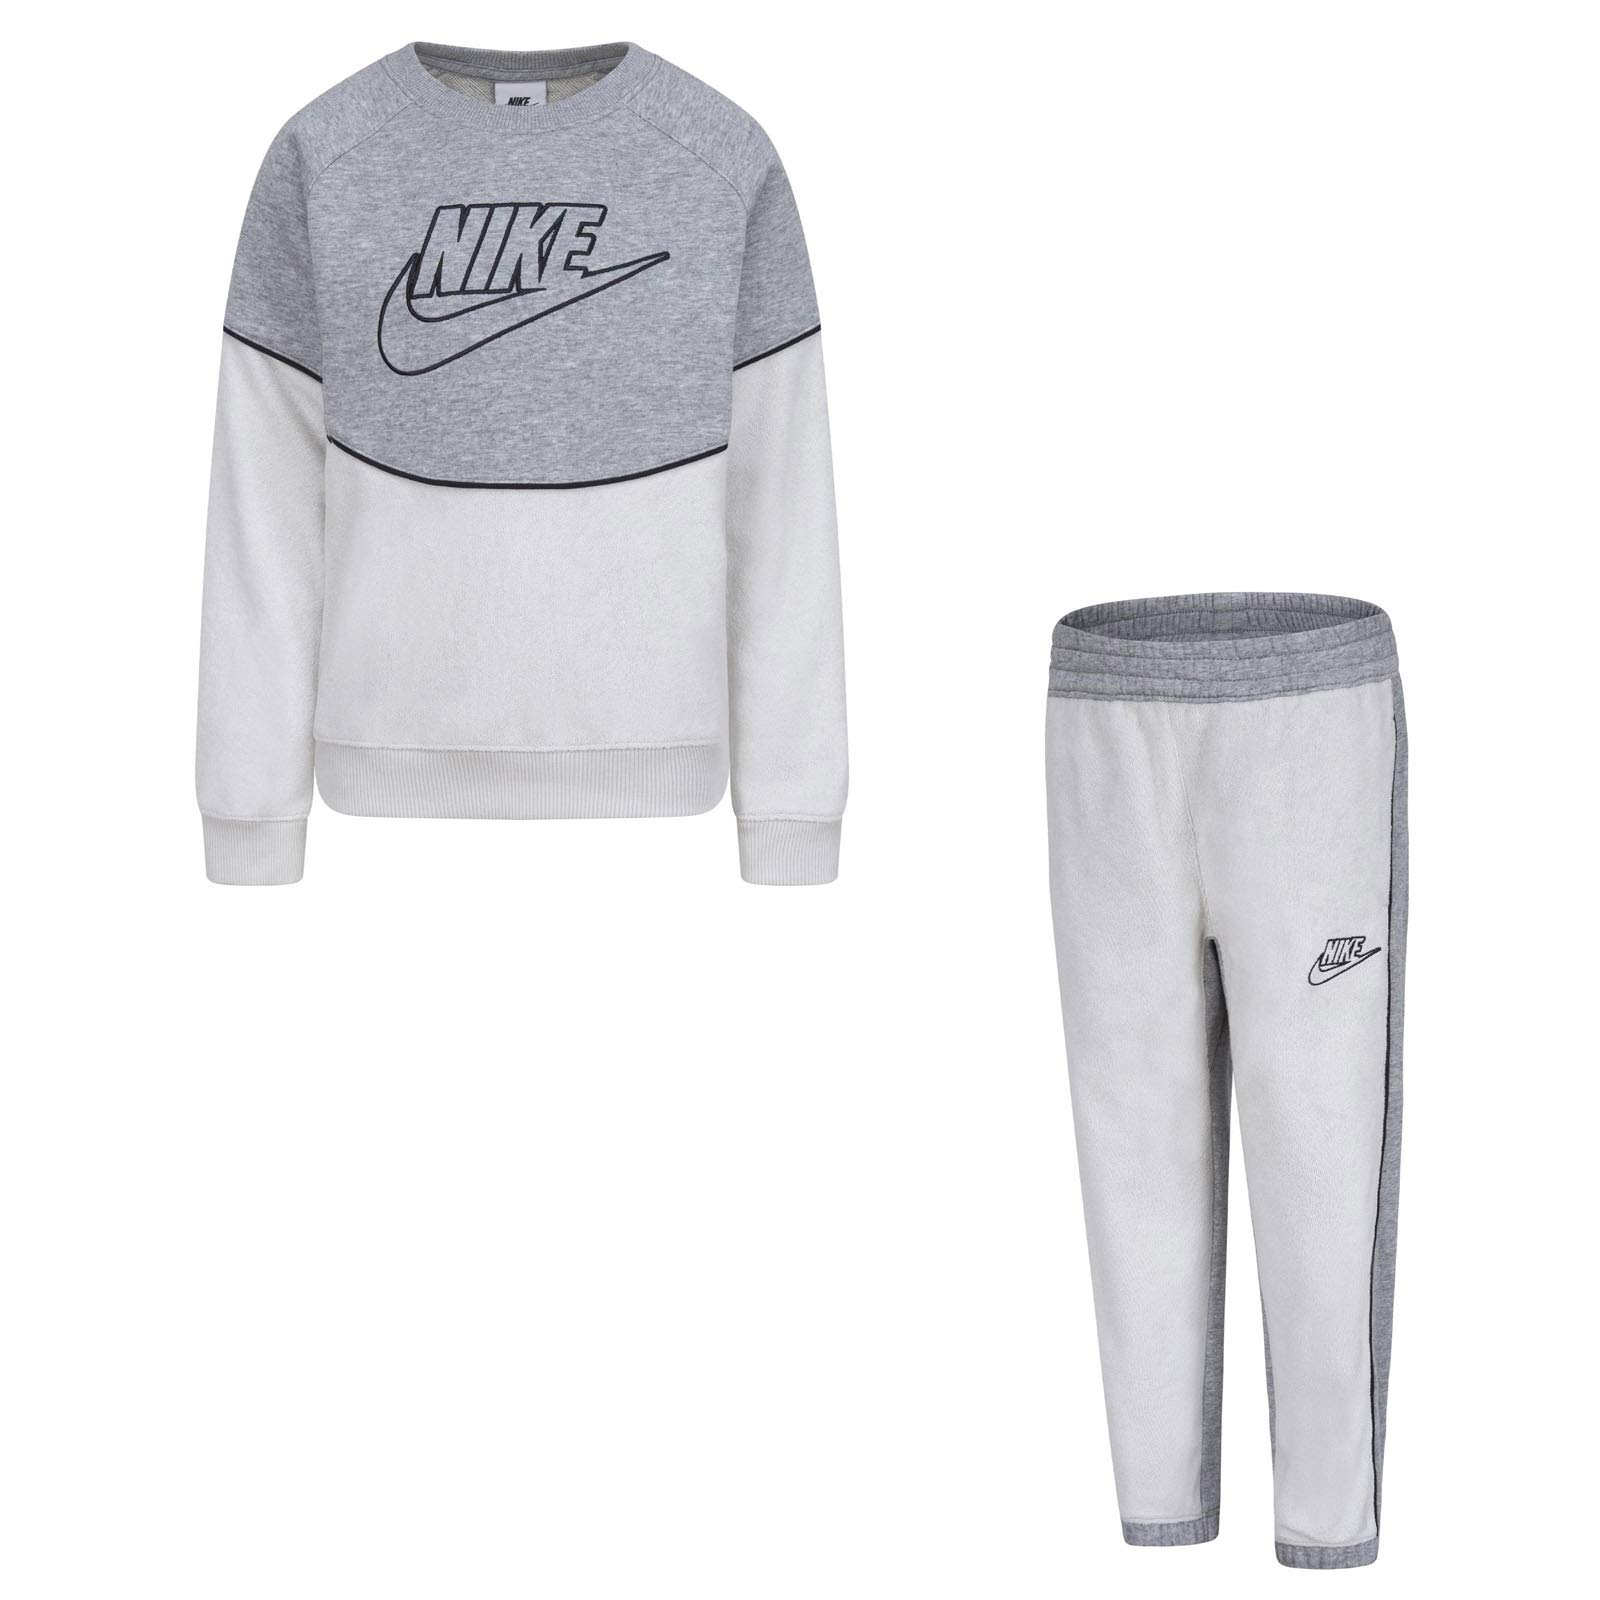 Nike Sportswear Amplify French Terry Crew Set | Tracksuits | Clothing ...